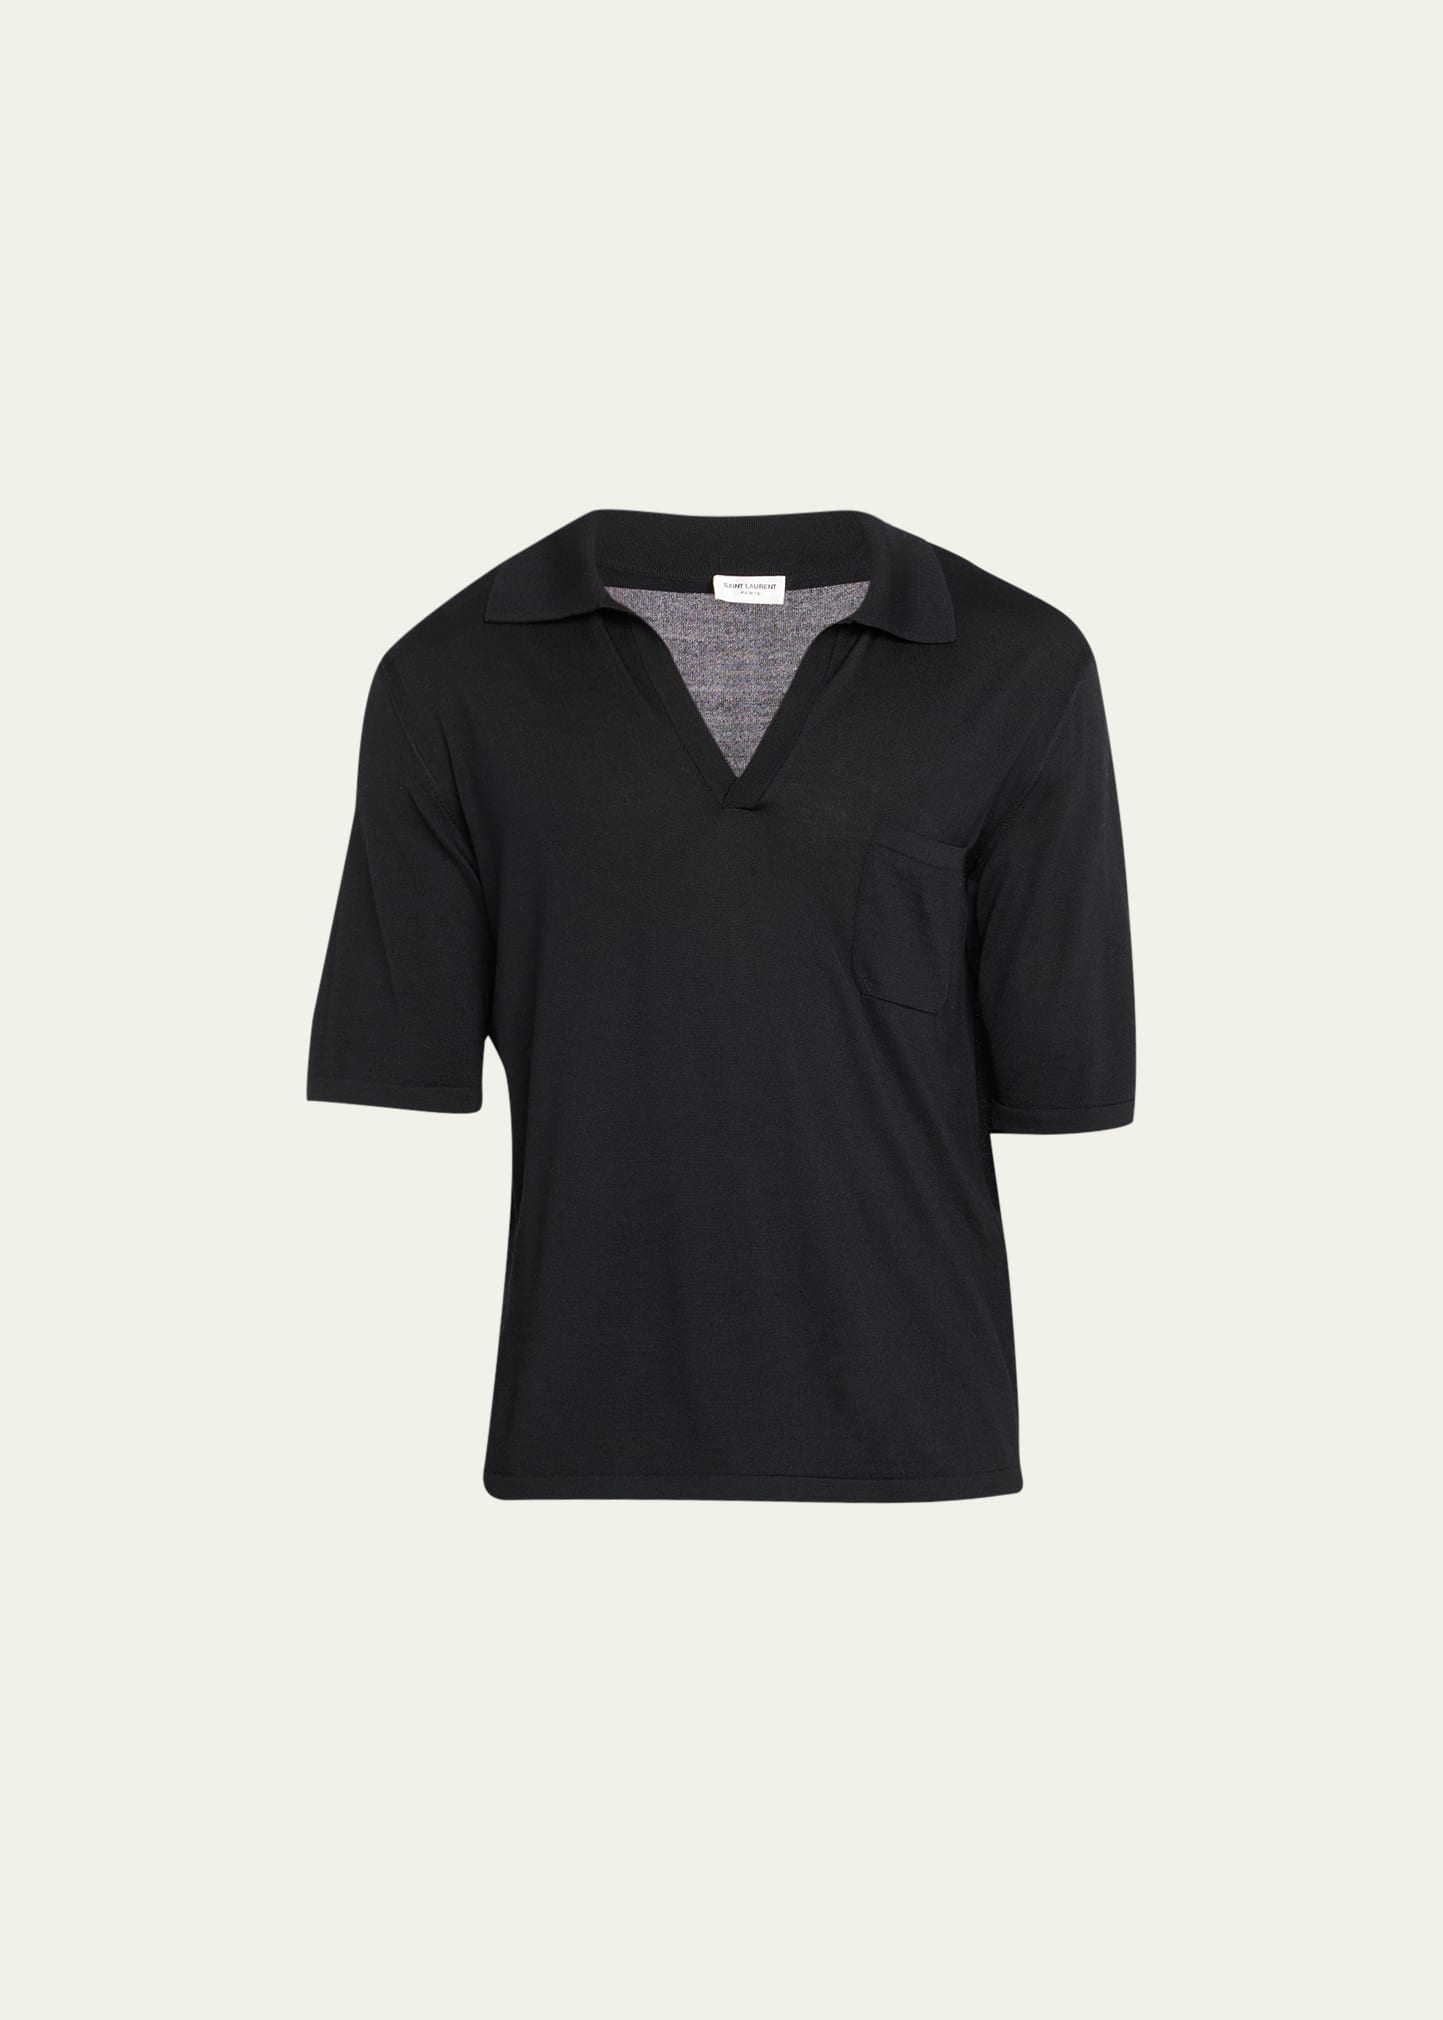 Saint Laurent Men's Knit Polo Shirt With Open Collar In Grey